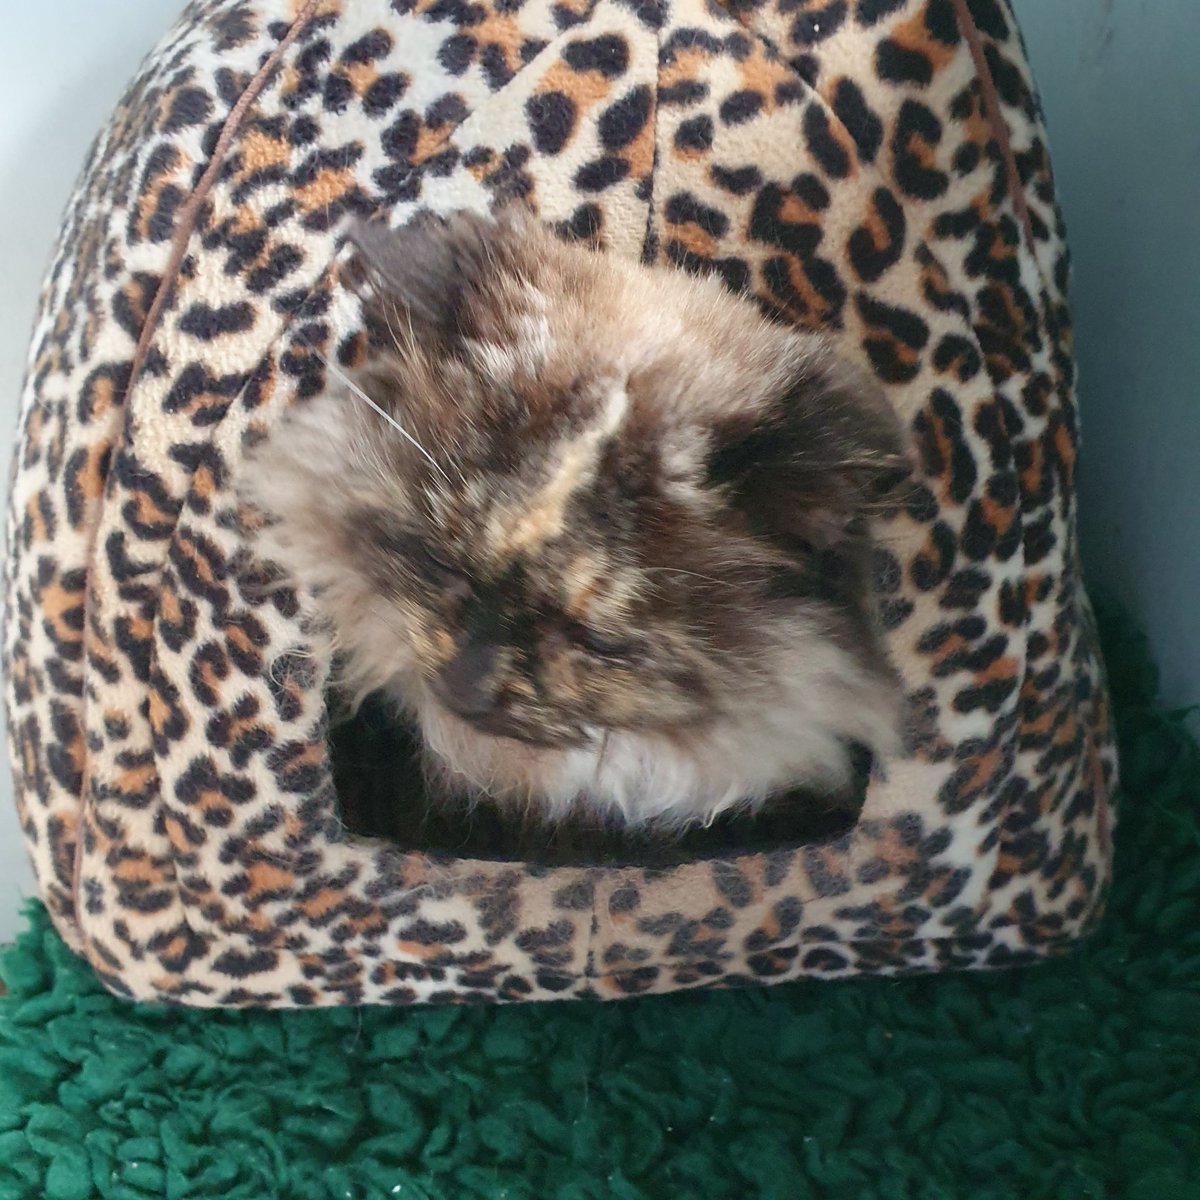 #Caturday and Tula has decided it is probably best to spend another day in her igloo. It's cold & windy & the volunteers can attend to her needs.#inthecompanyofcats #seniorcats #catrescue #rescuecats #catsrock #catvibes #saturday